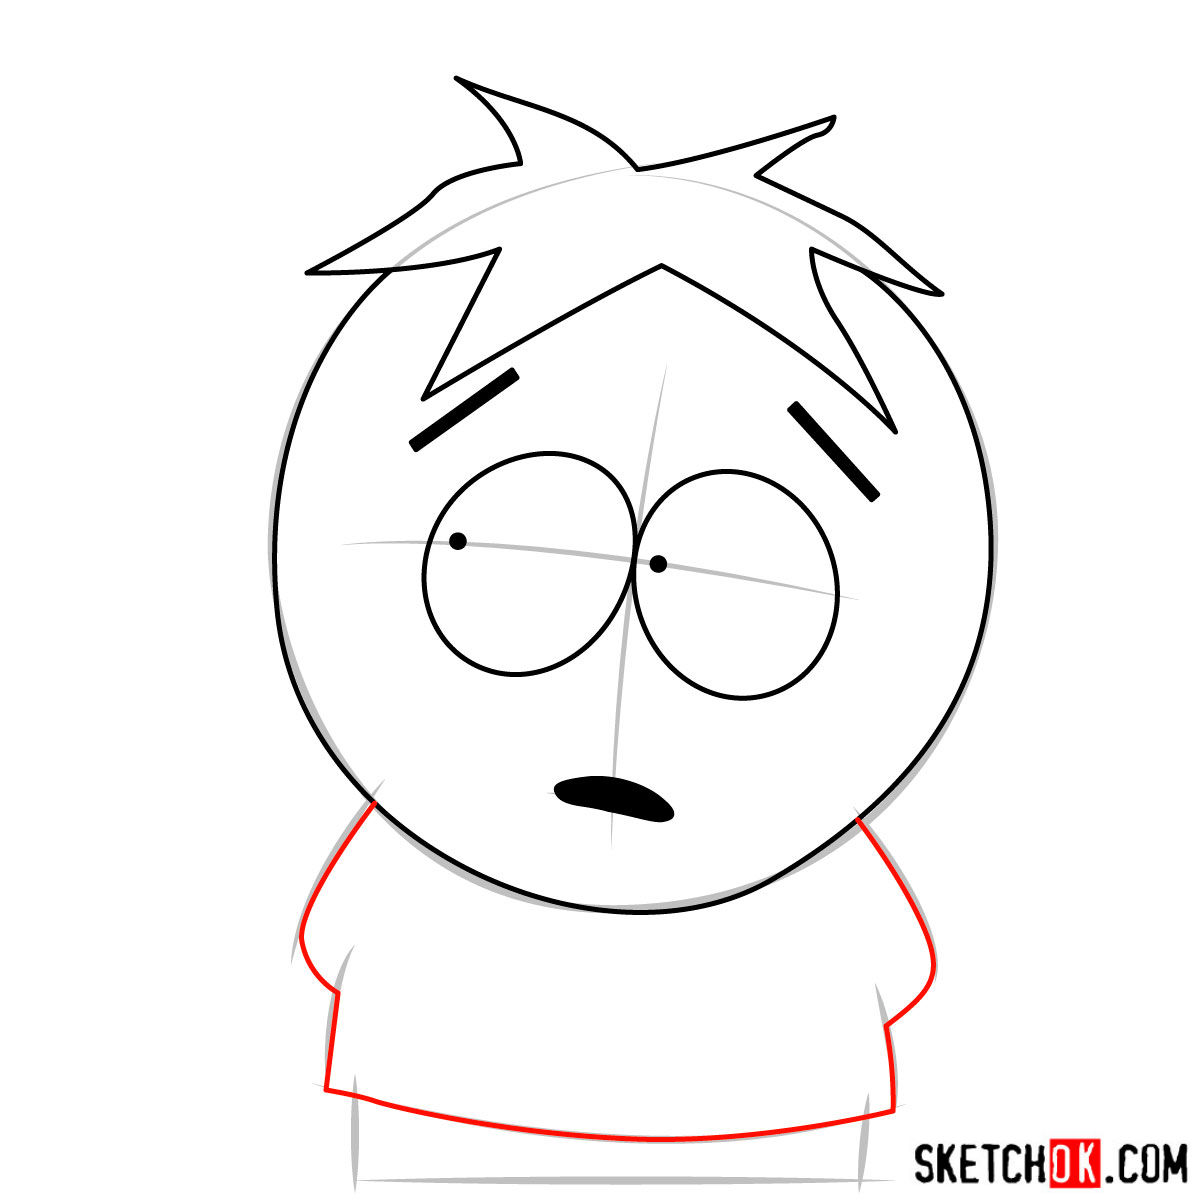 How to draw Butters Stotch - step 04